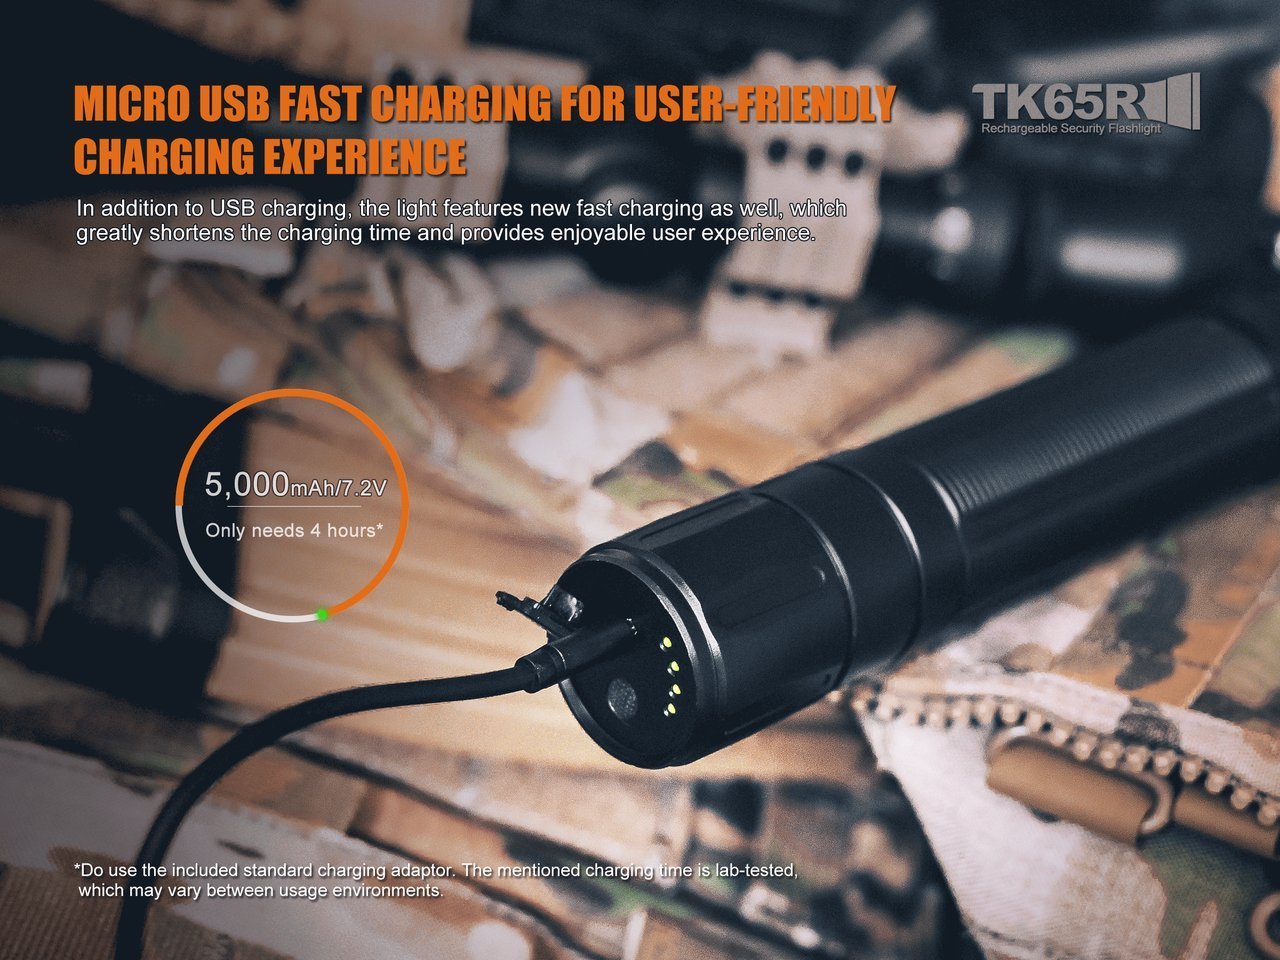 FENIX TK65R USB Rechargeable 3200 Lumen Cree LED Police Flashlight with, 5000mAh rechargeable battery, Belt clip and EdisonBright USB charging cable bundle - image 5 of 6